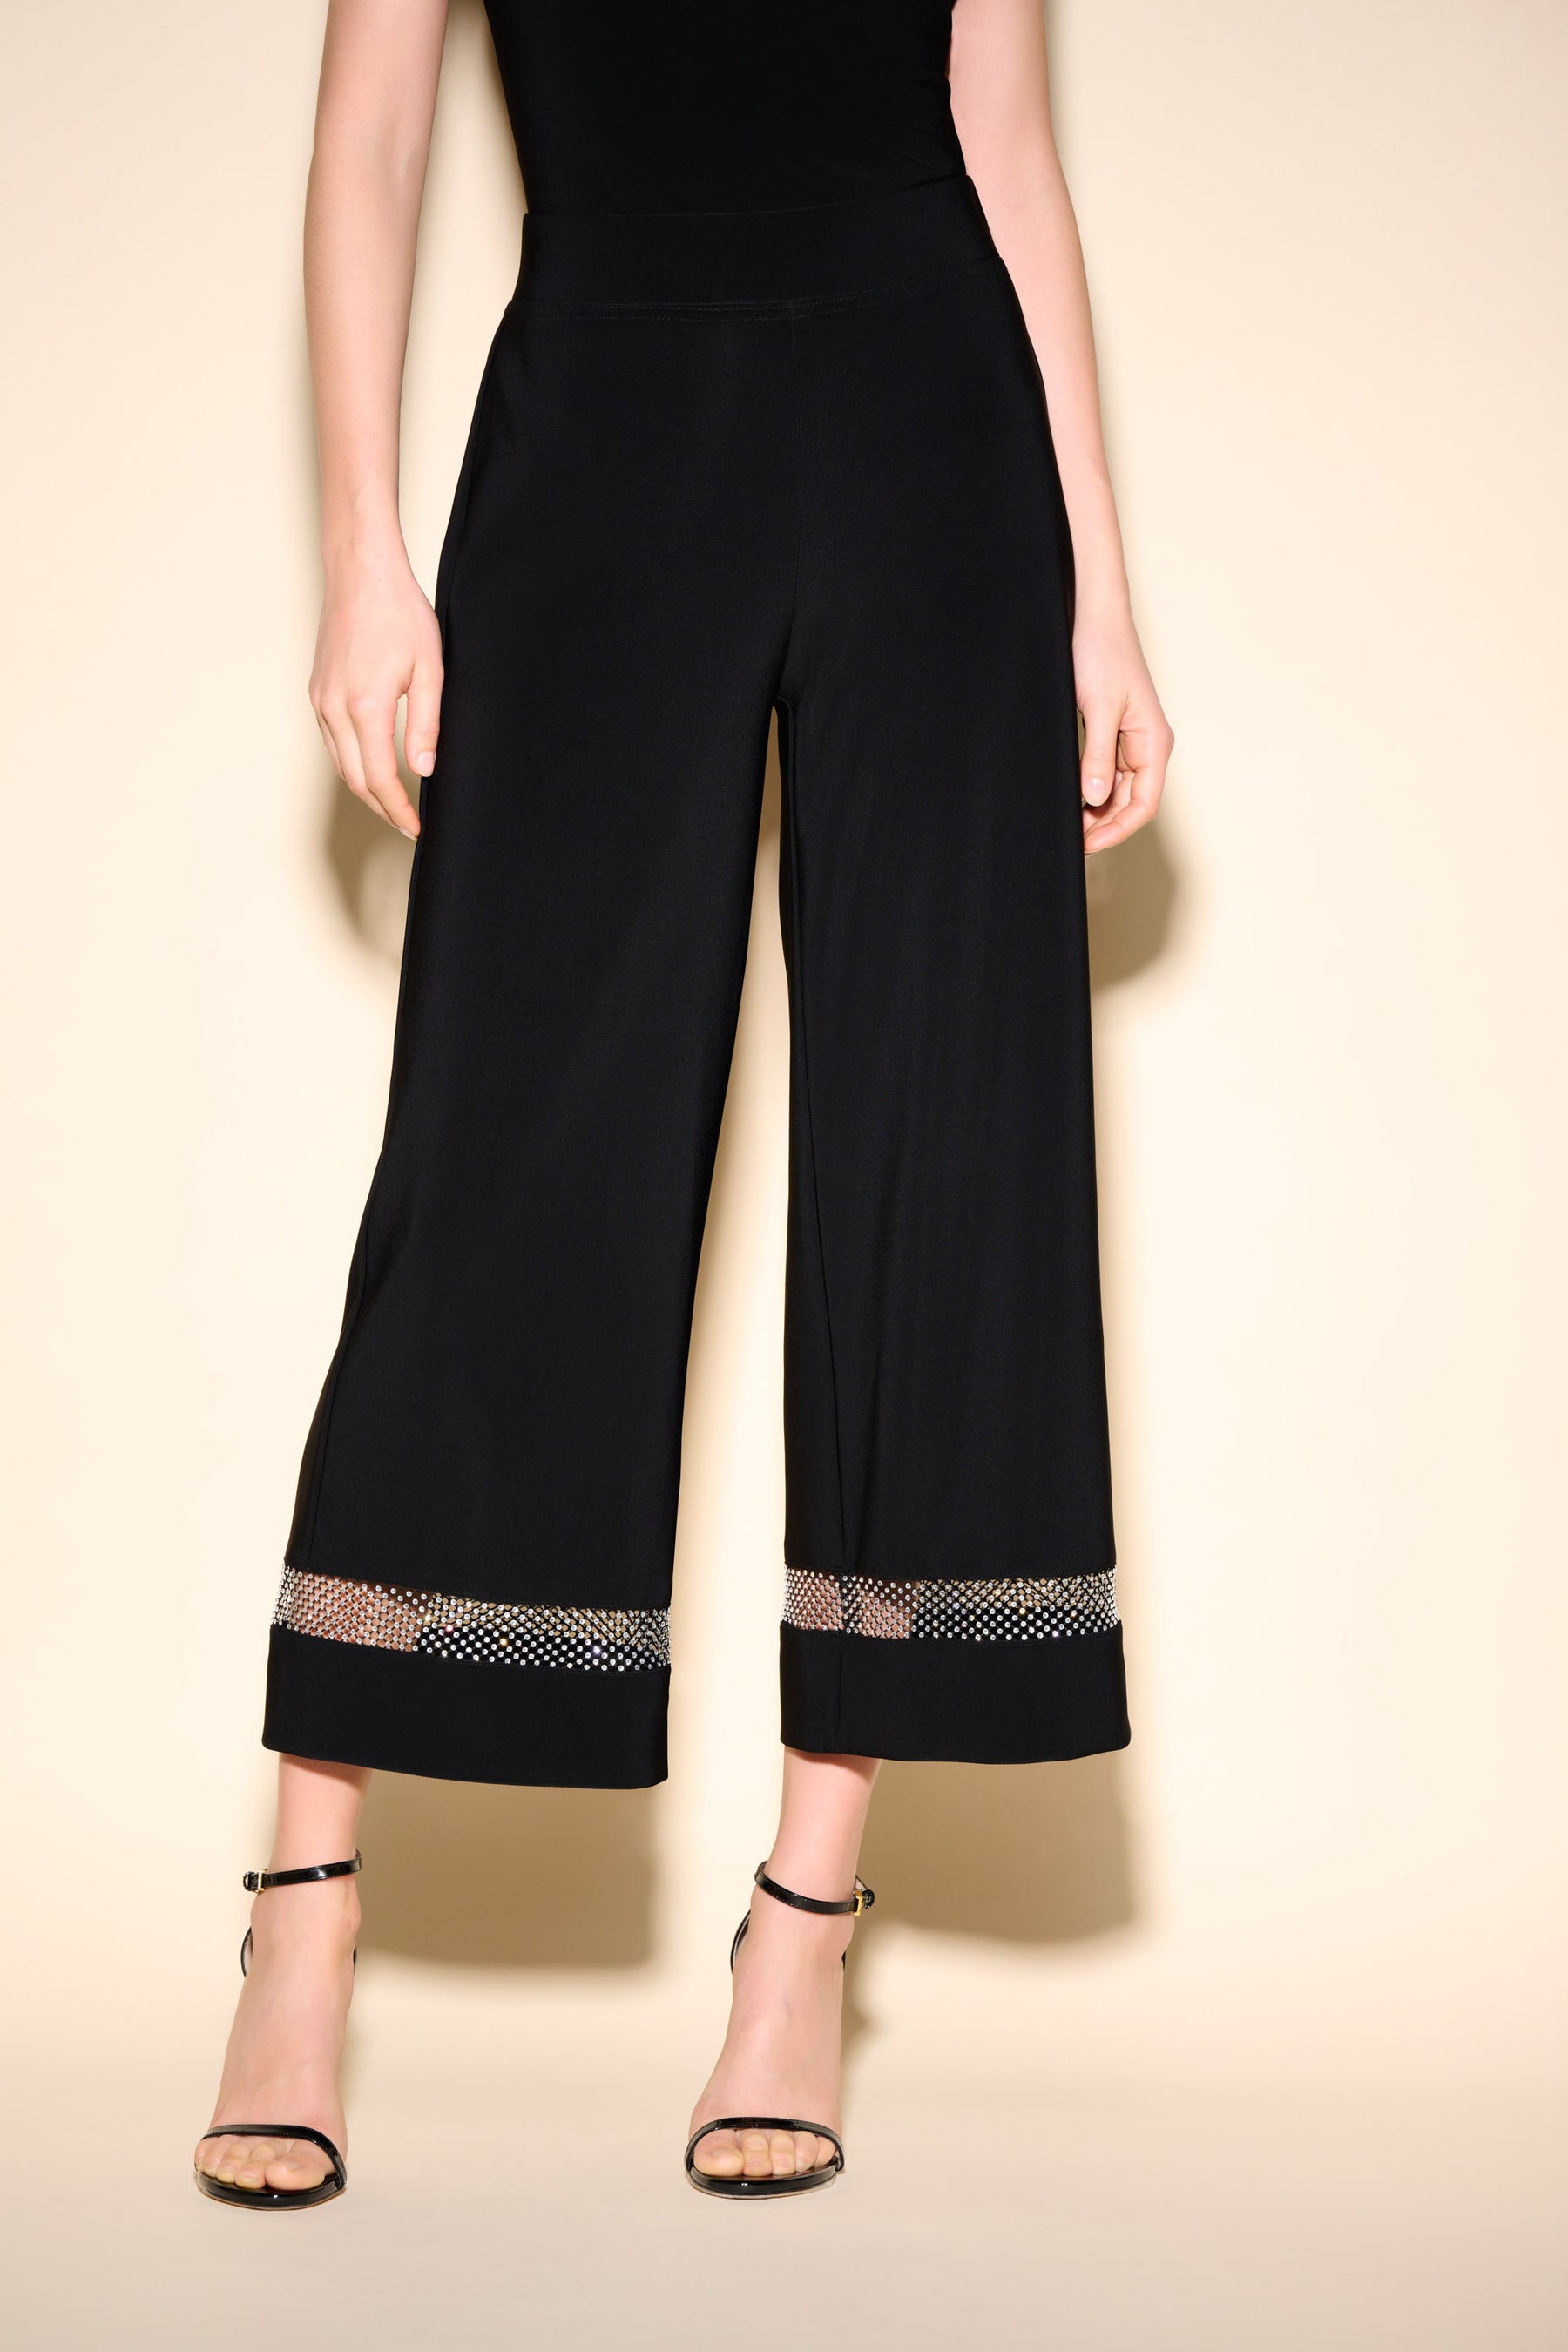 Silky Knit Culotte Pant with Rhinestone Net Inserts